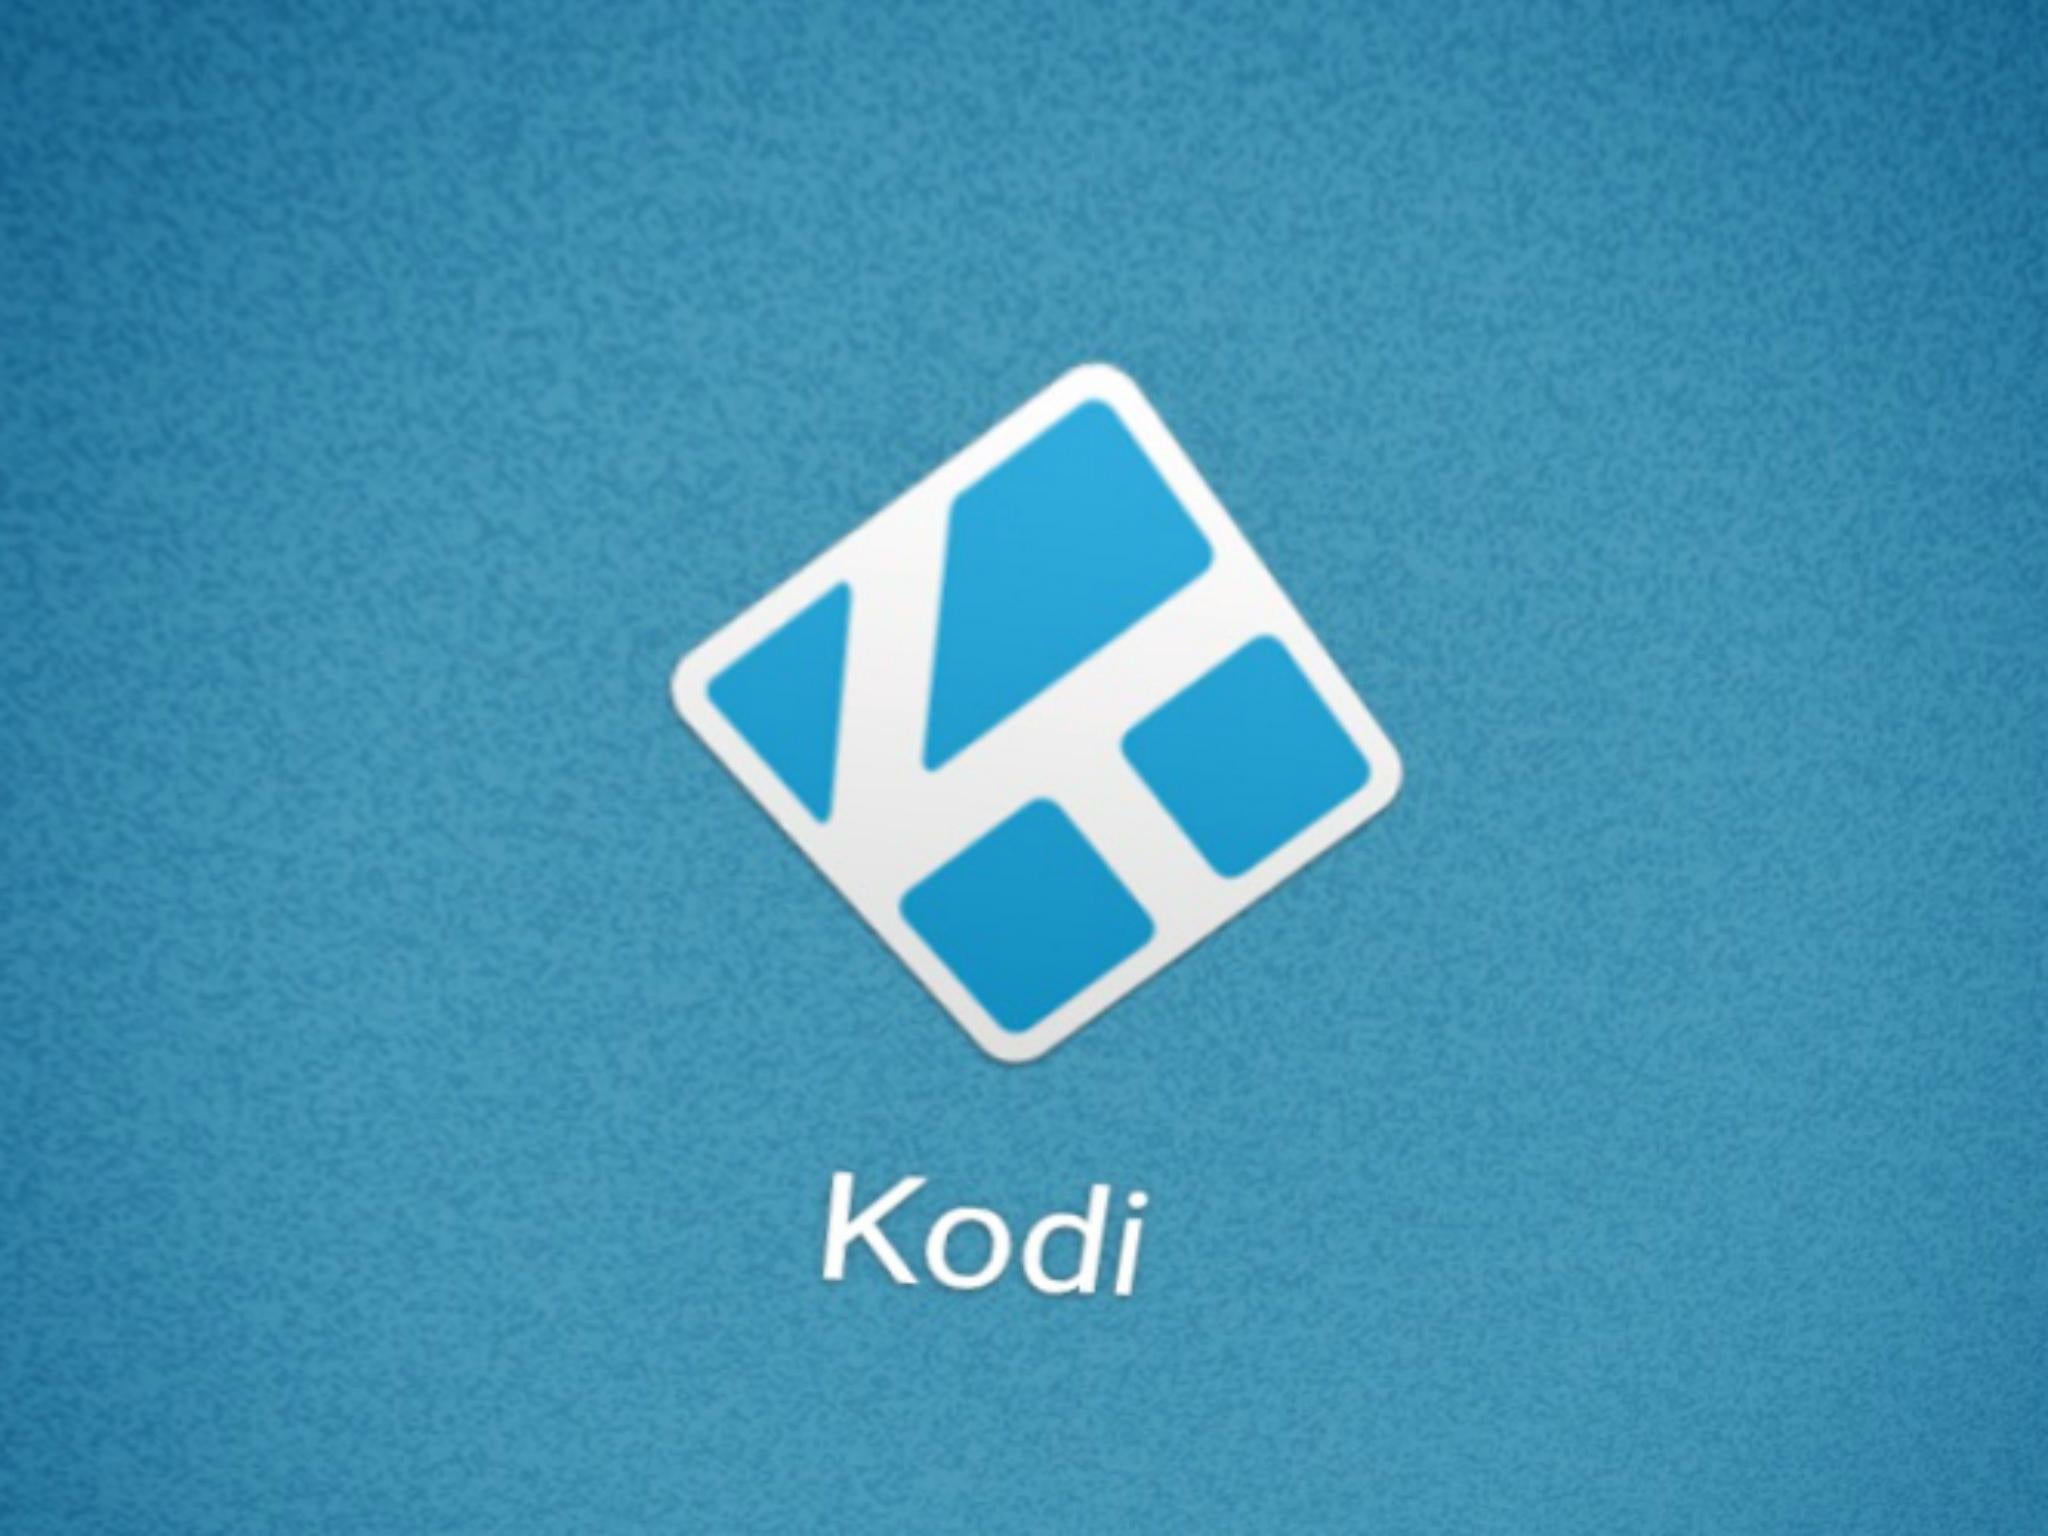 Most Kodi users need to be stopped from using illegal ...